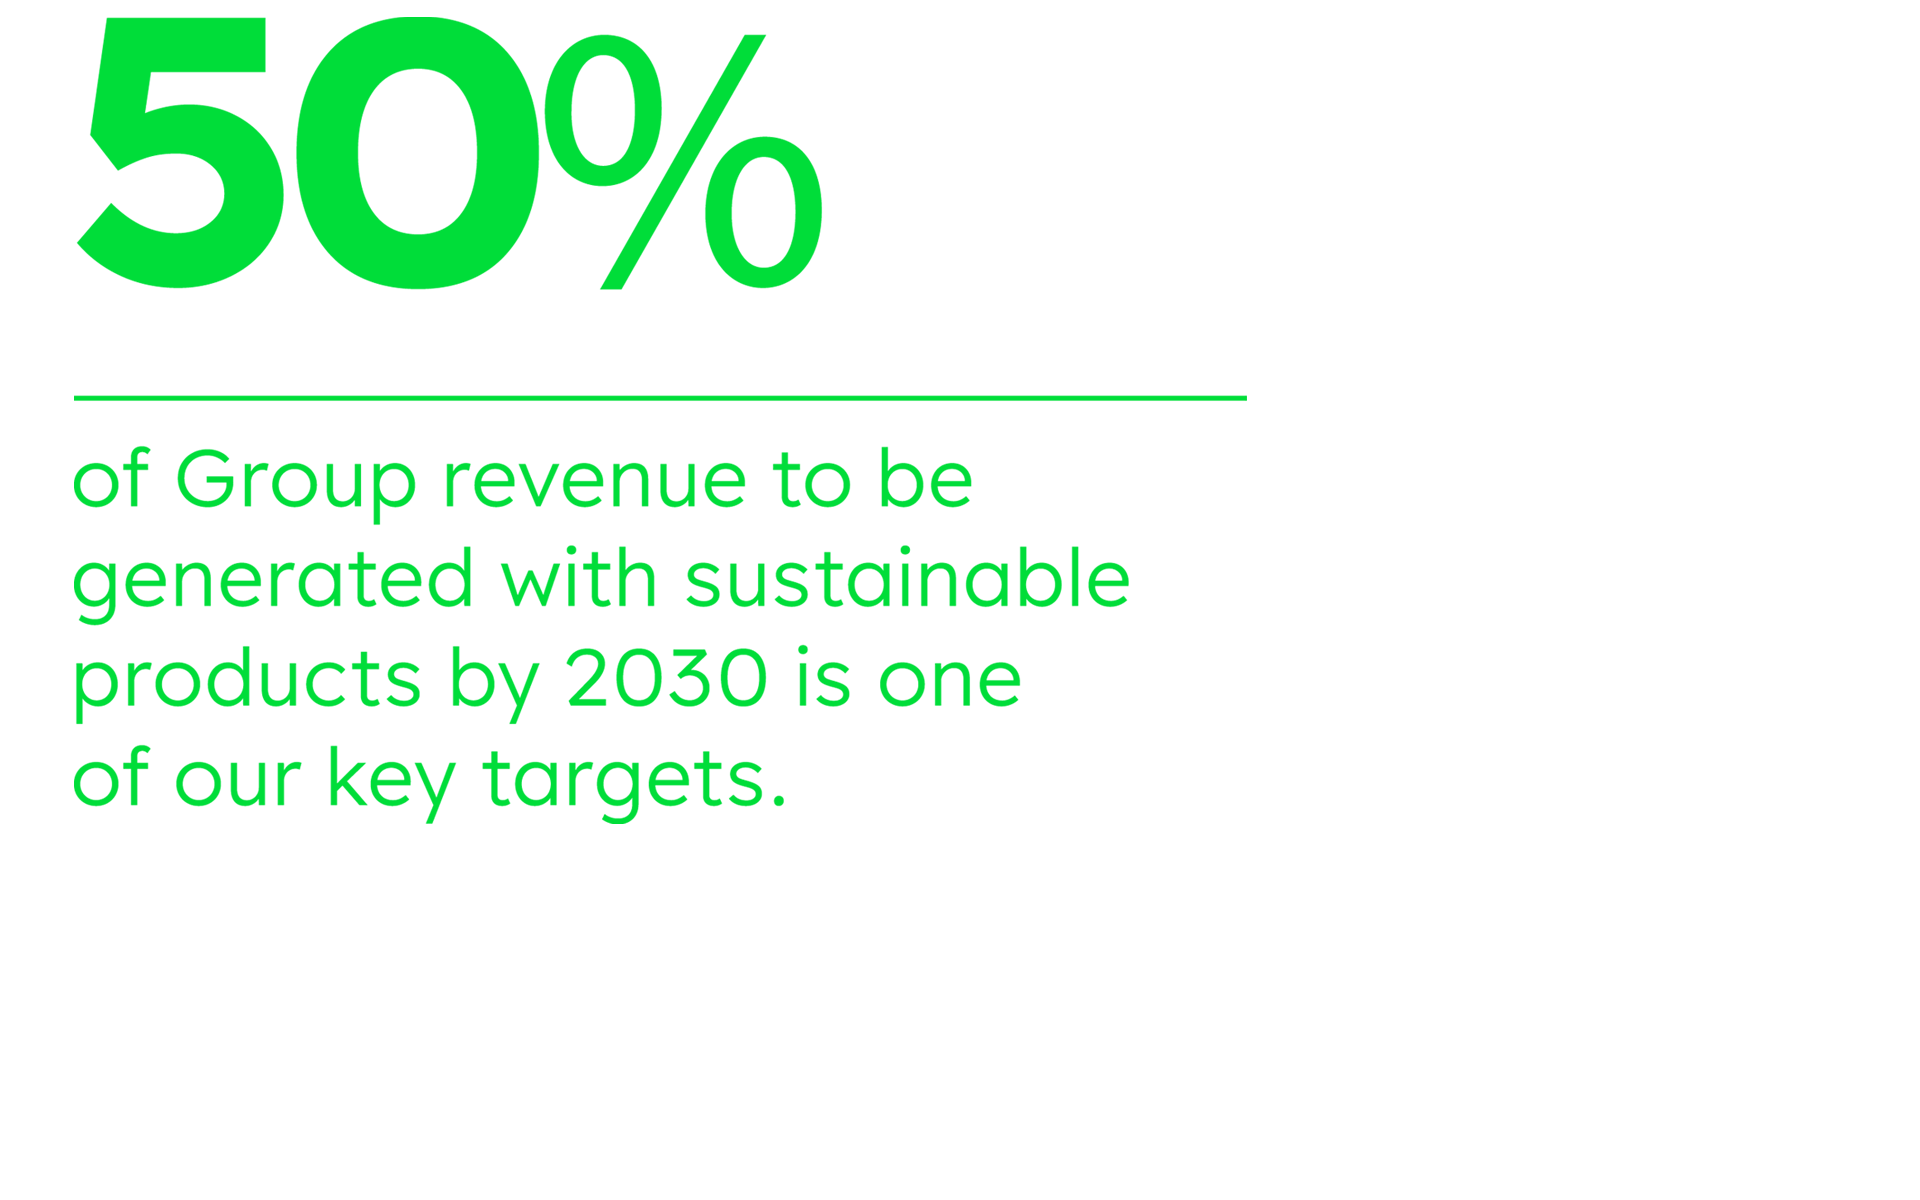 Text: "50 % of Group revenue to be generated with sustainable products by 2030 is one of our key targets."